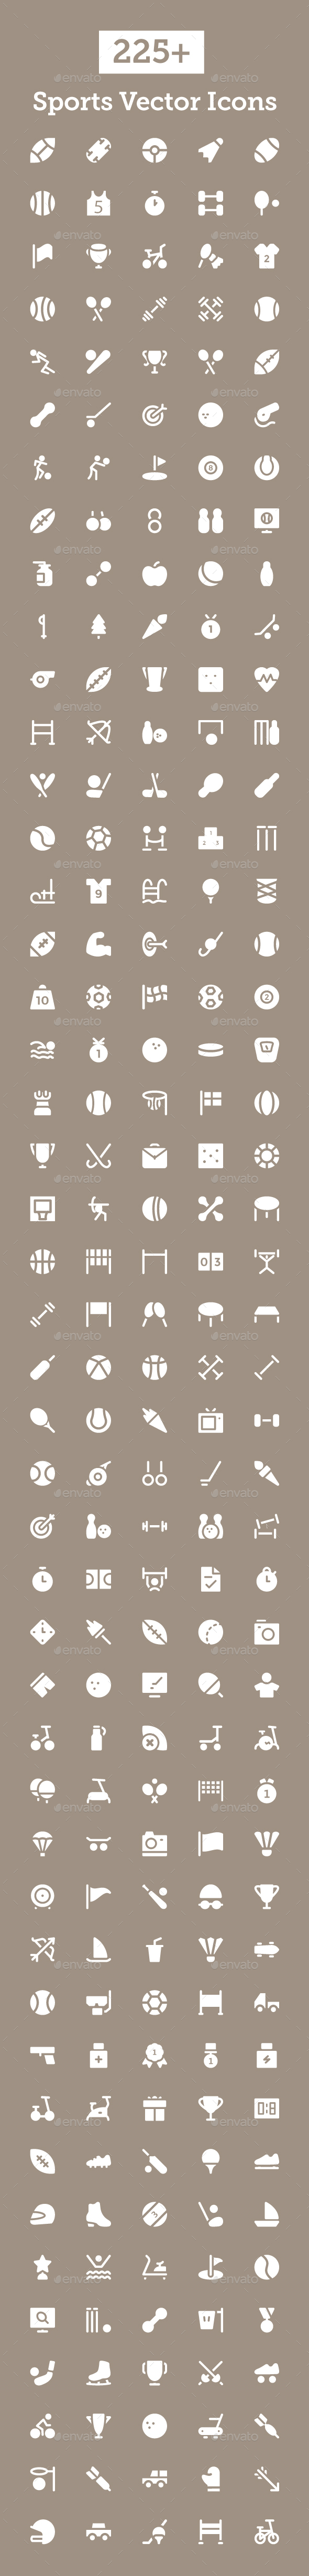 225+ Sports Vector Icons